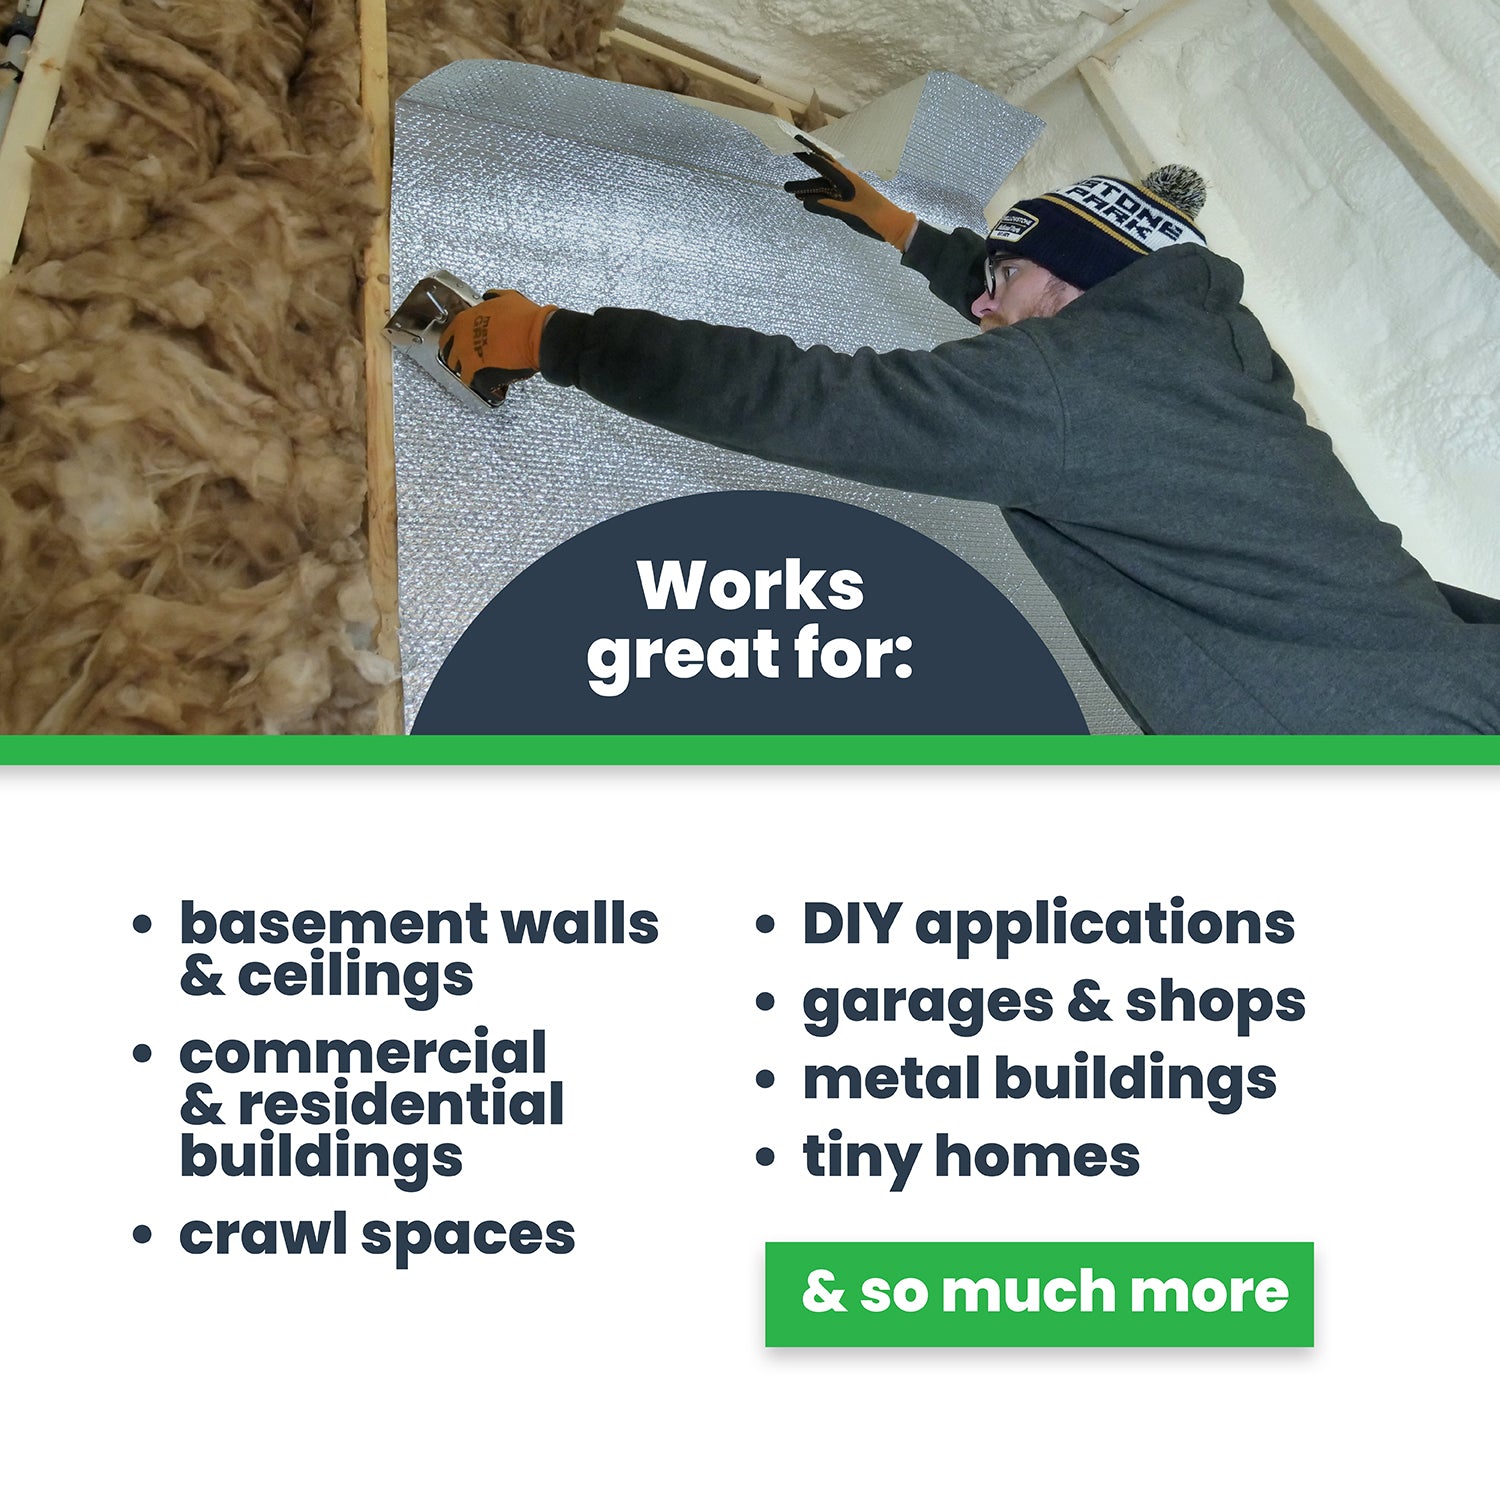 single bubble insulation for basements, commercial and residential buildings, crawl spaces, garages, metal buildings, tiny houses, more